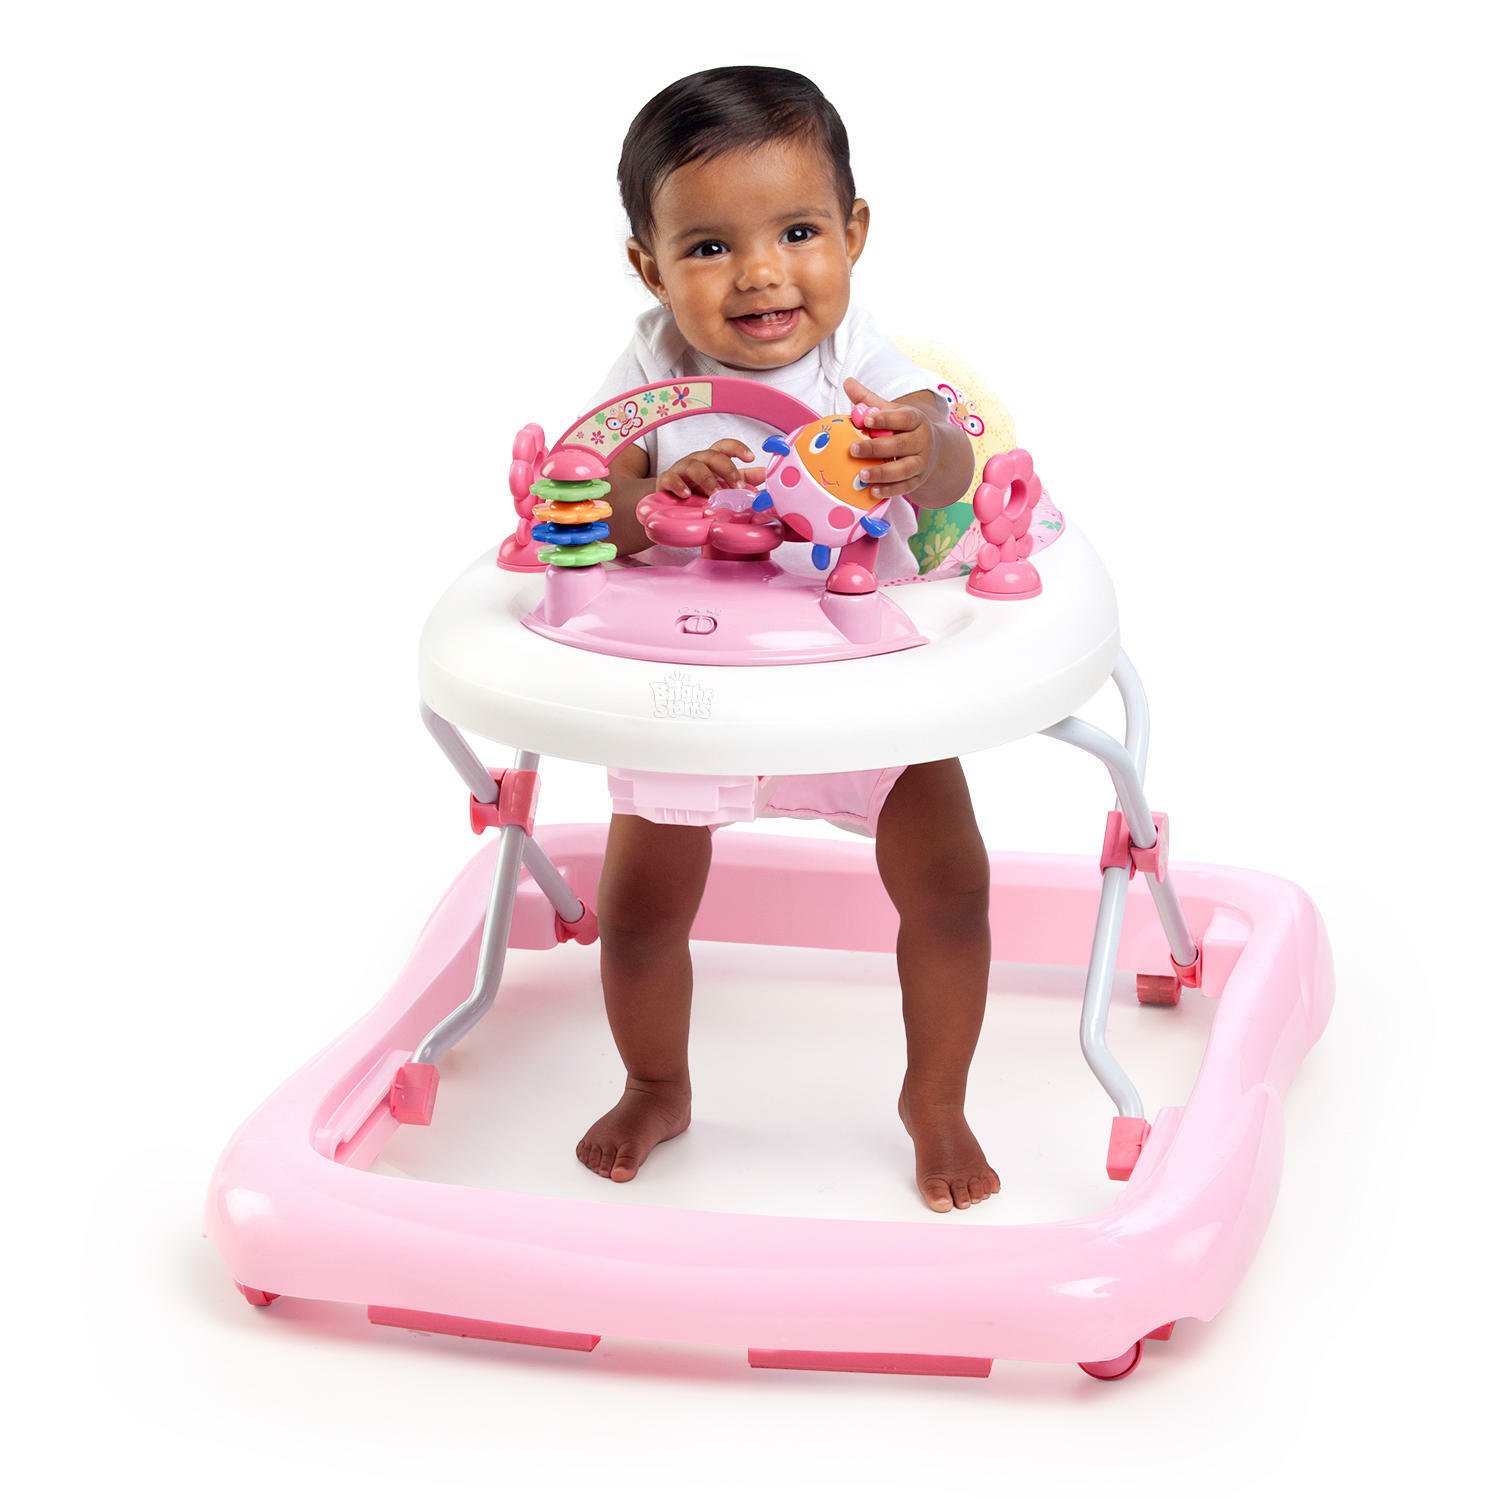 Bright Starts Juneberry Baby Walker with Lights & Melodies Review